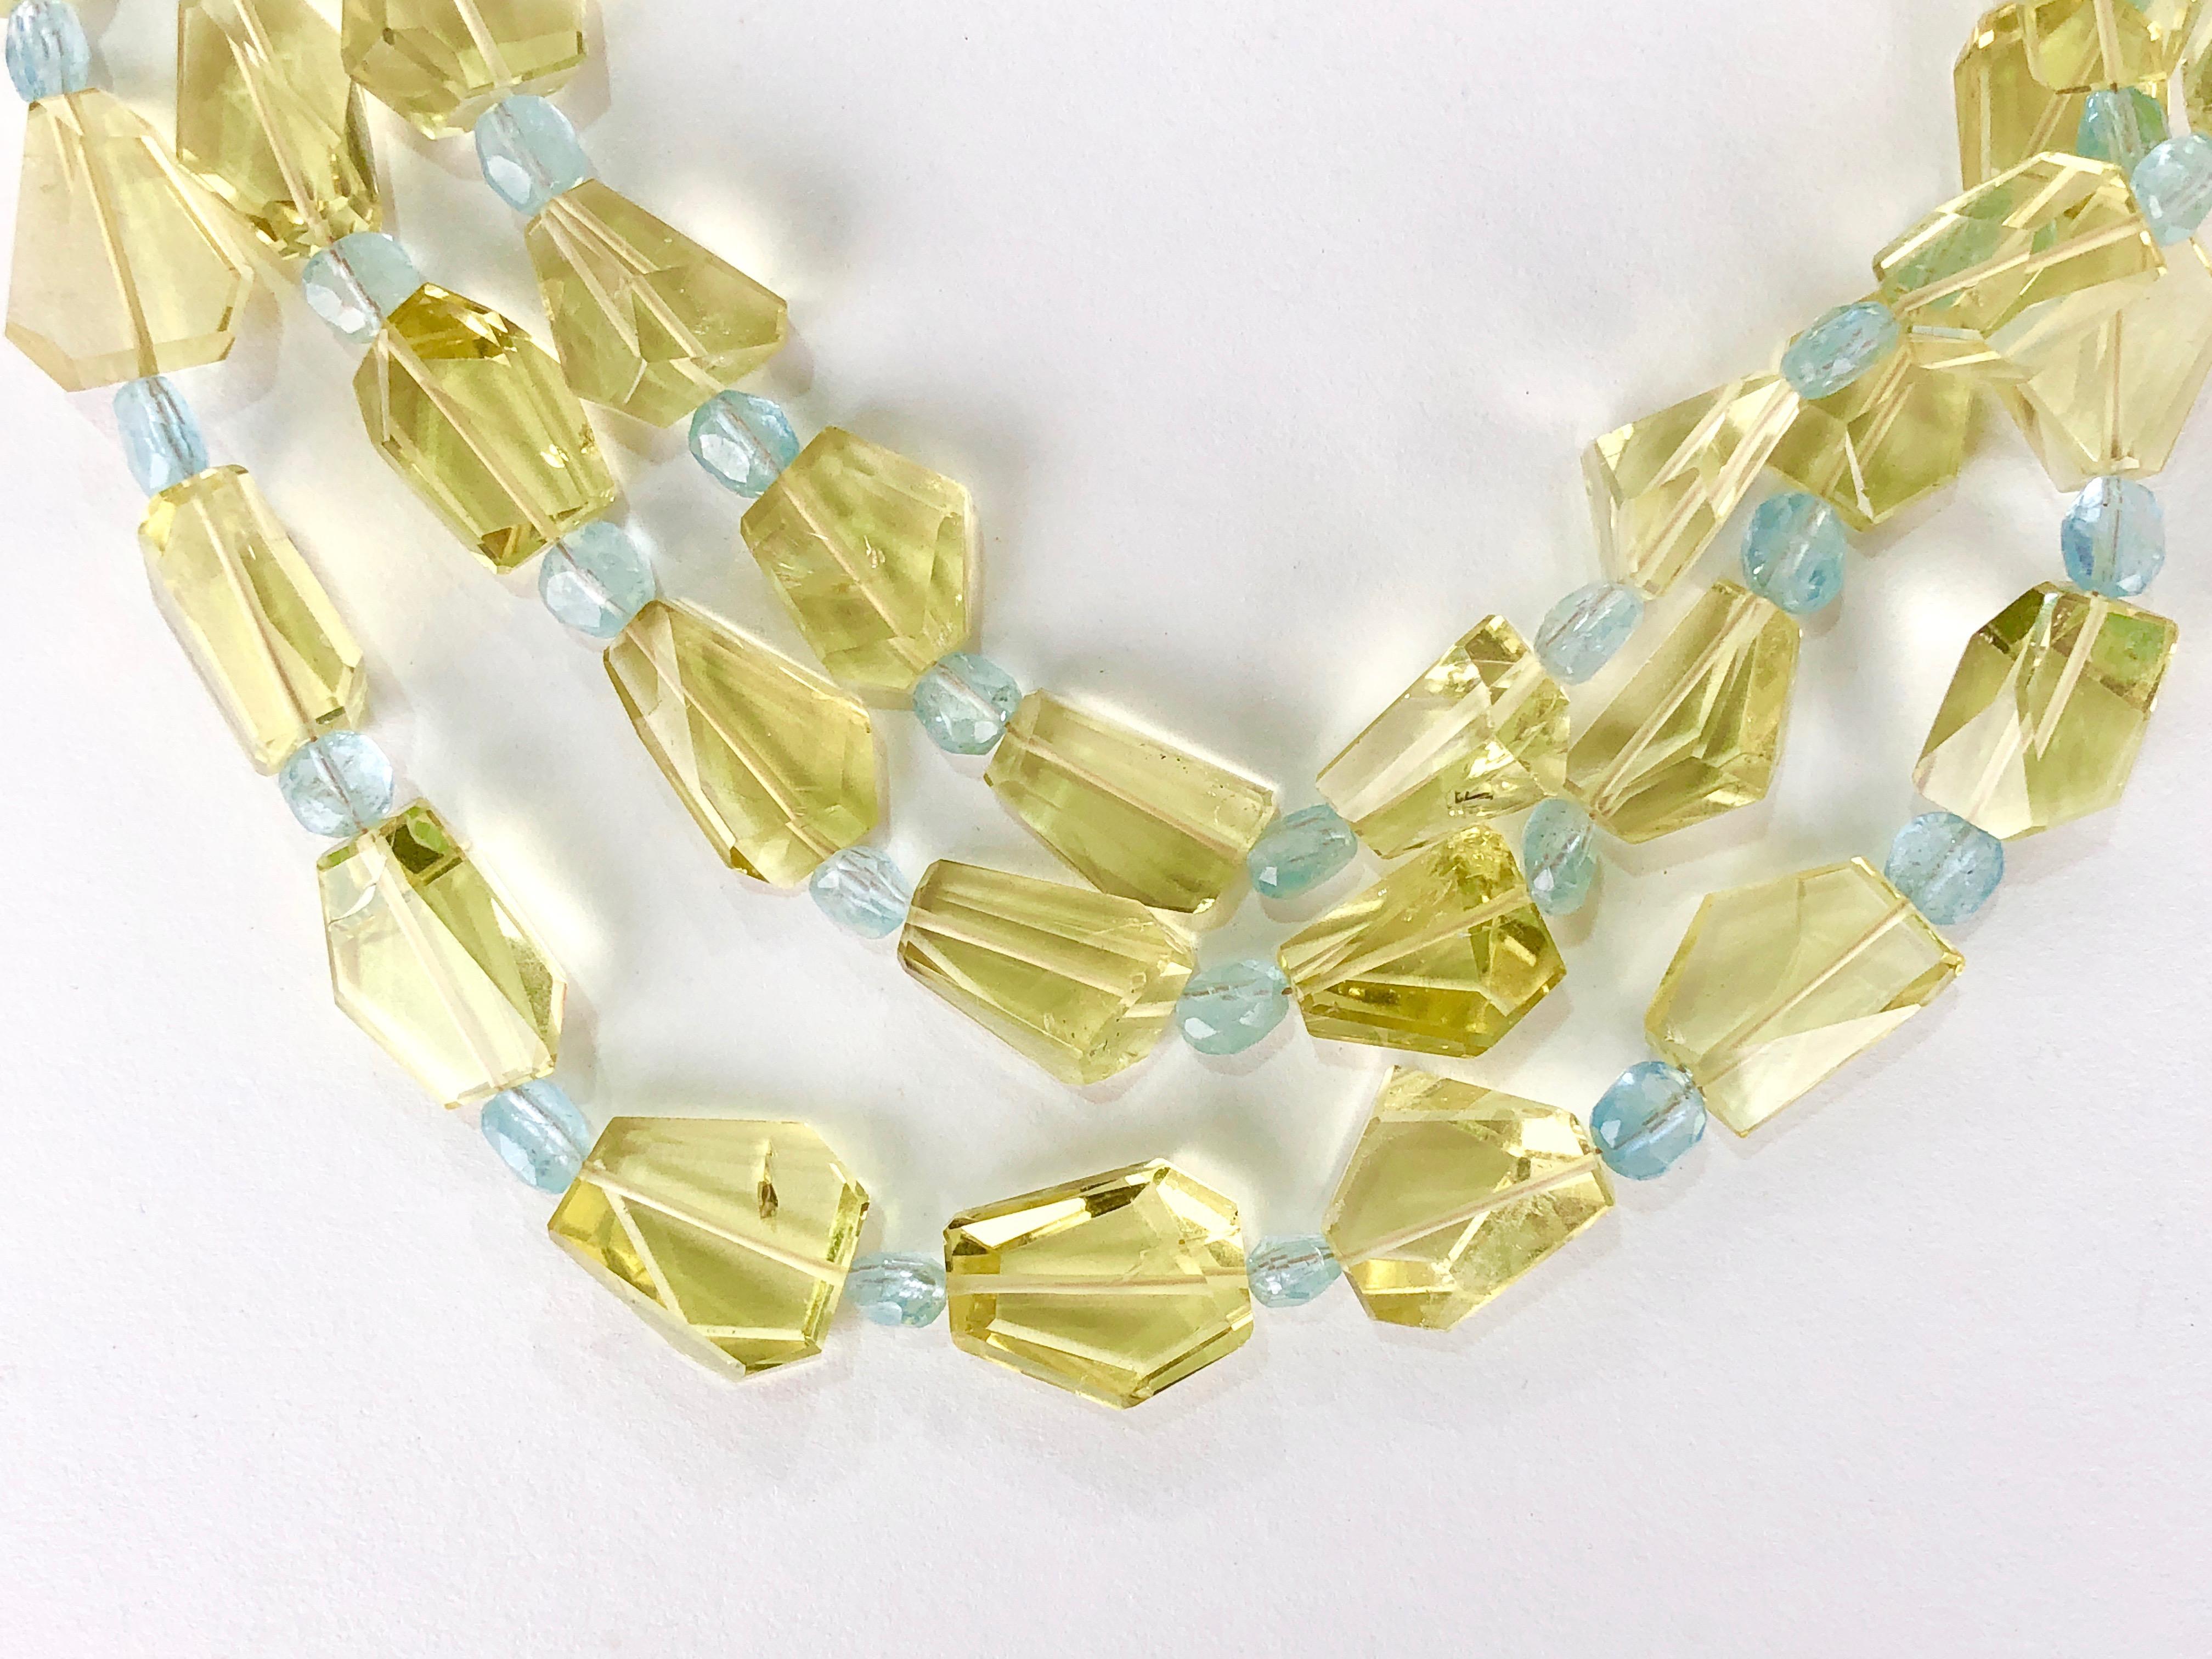 A vivid and brilliant necklace! Turn heads in Susan Lister Locke's Lemon Citrine and Aquamarine Three Strand Necklace. The layered look of the necklace caters to modern style and allows the precious gem stones to truly stand out. The necklace is